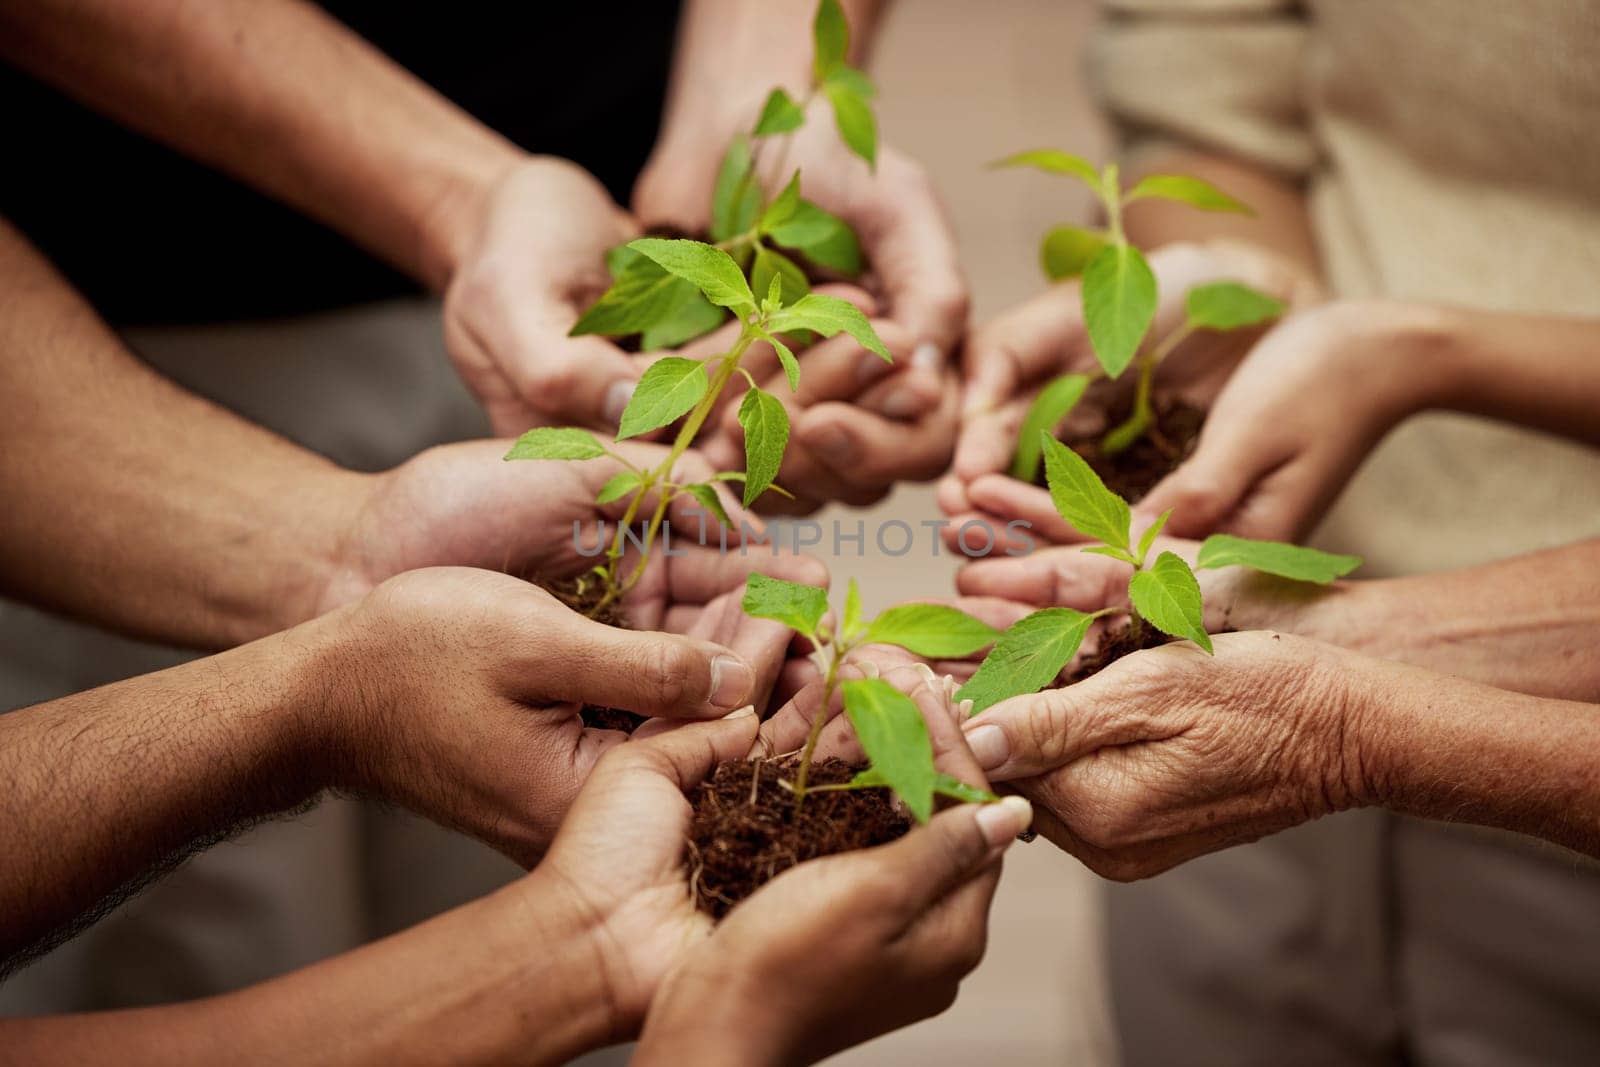 Hands, plants and growth with people or team, business and eco friendly for earth day or collaboration support. Investment, environment and community service, nurture or agro for sustainability.